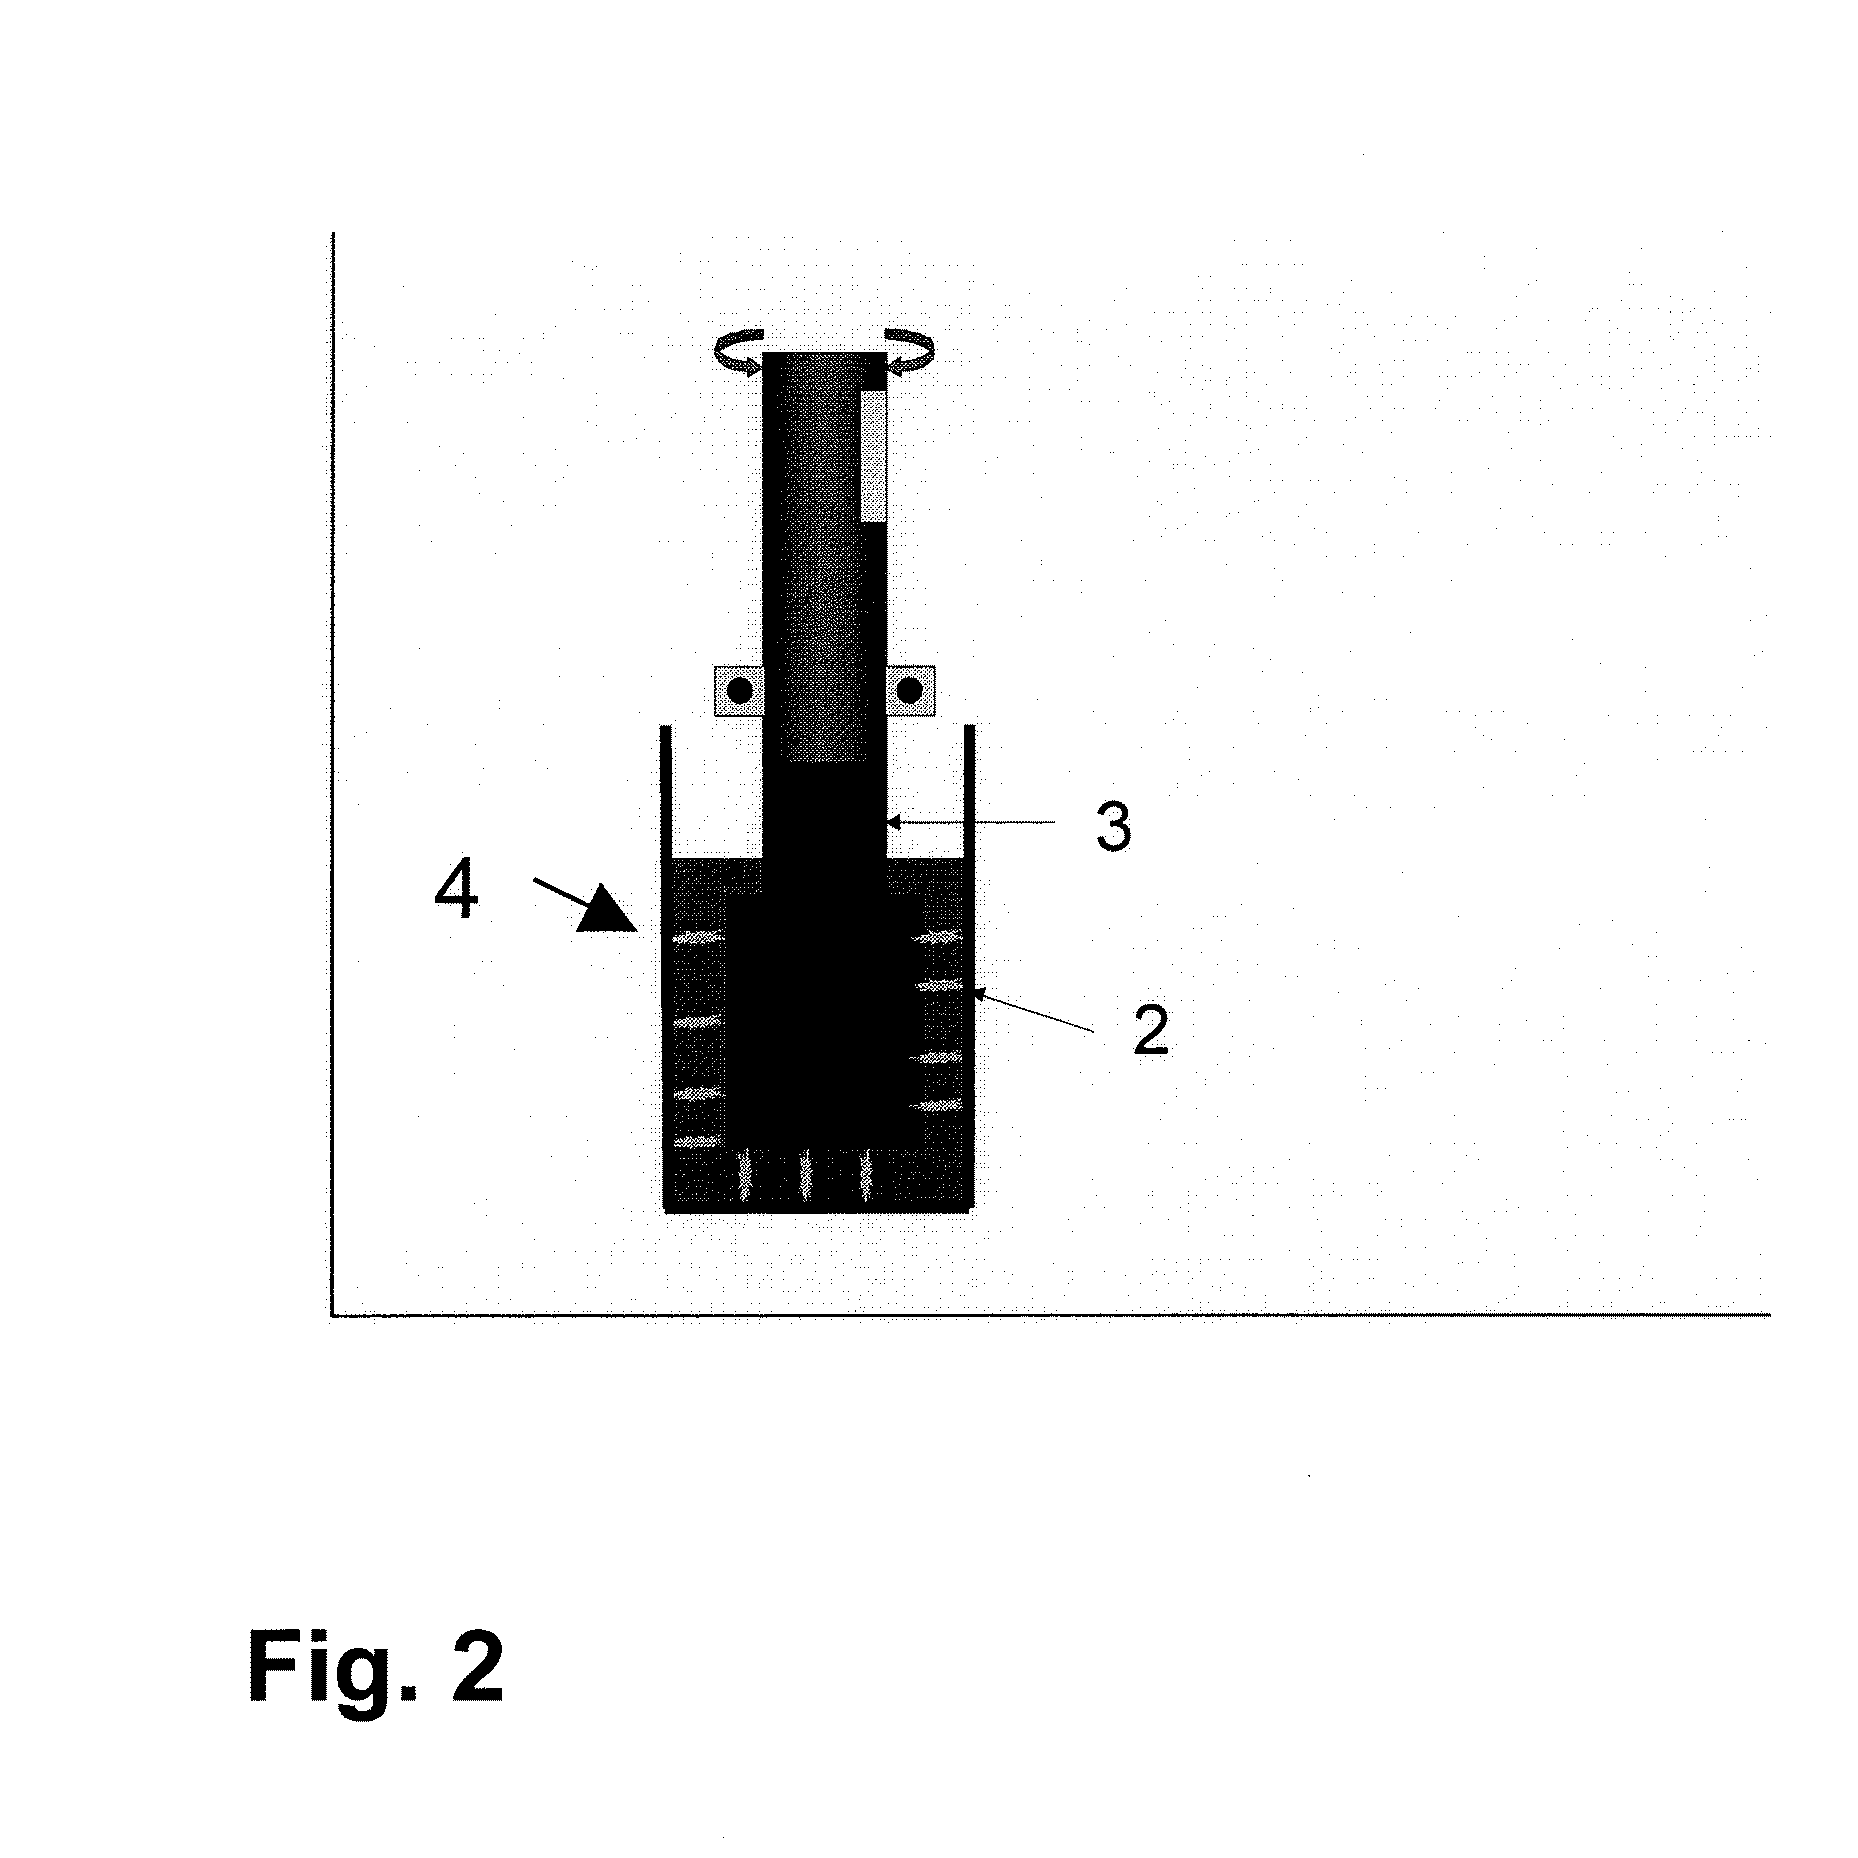 Composition for the determination of coagulation characteristics of a test liquid